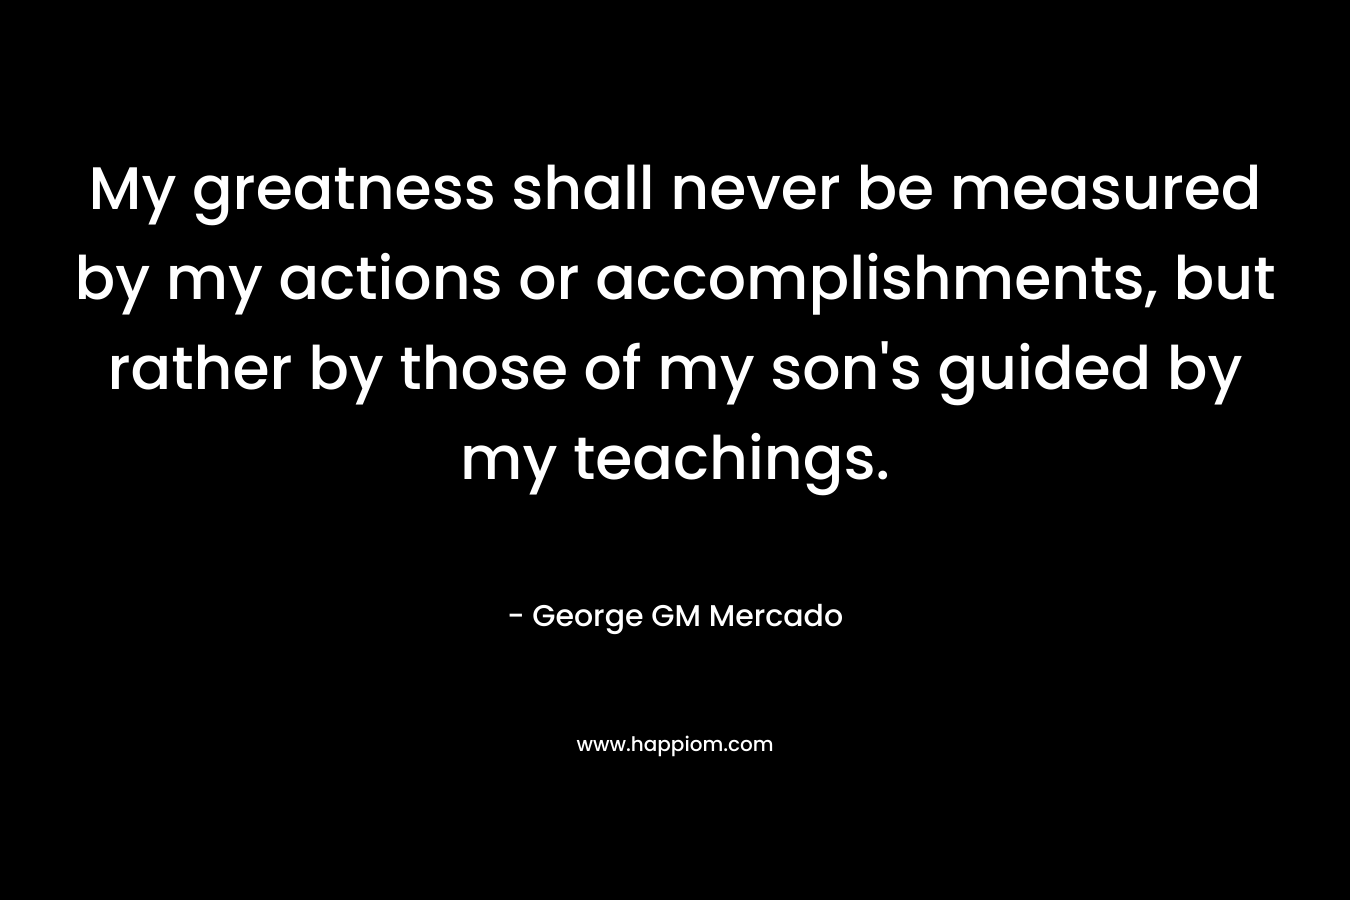 My greatness shall never be measured by my actions or accomplishments, but rather by those of my son's guided by my teachings.